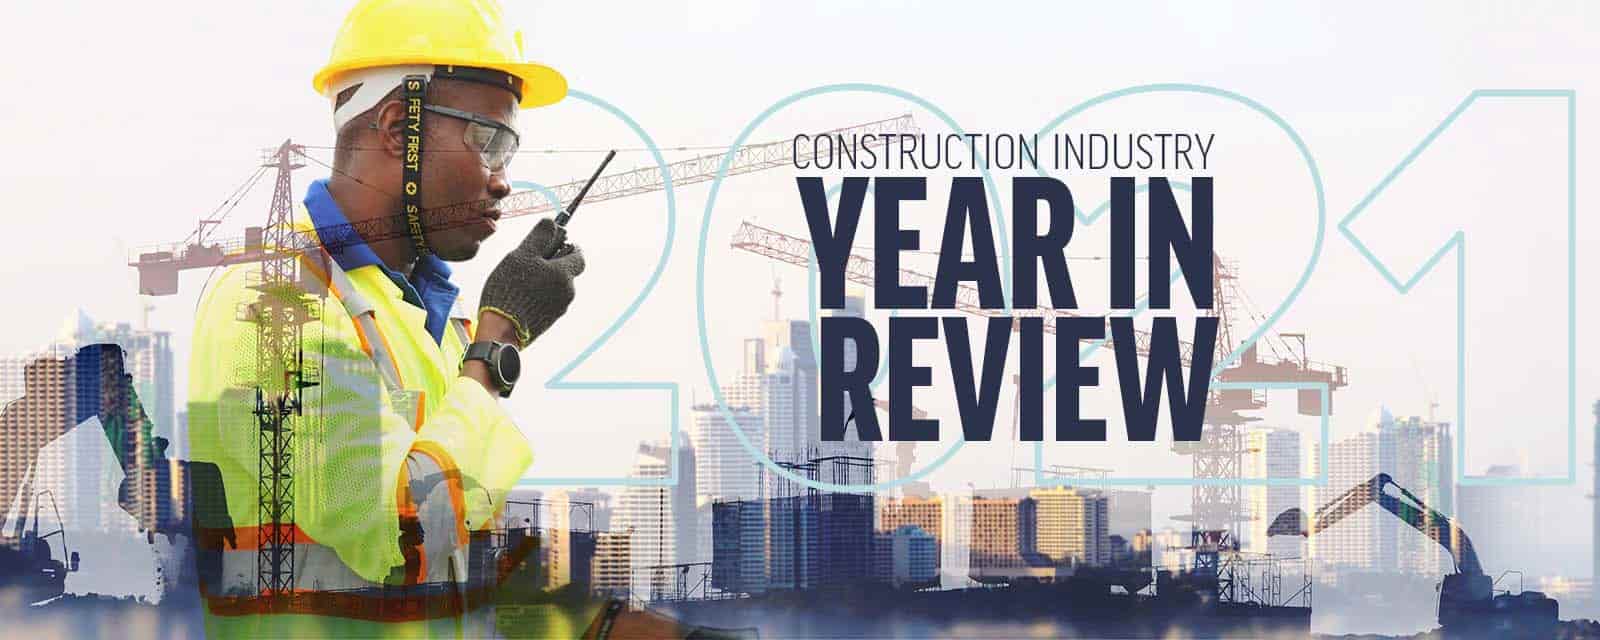 Construction Industry Year in Review 2021